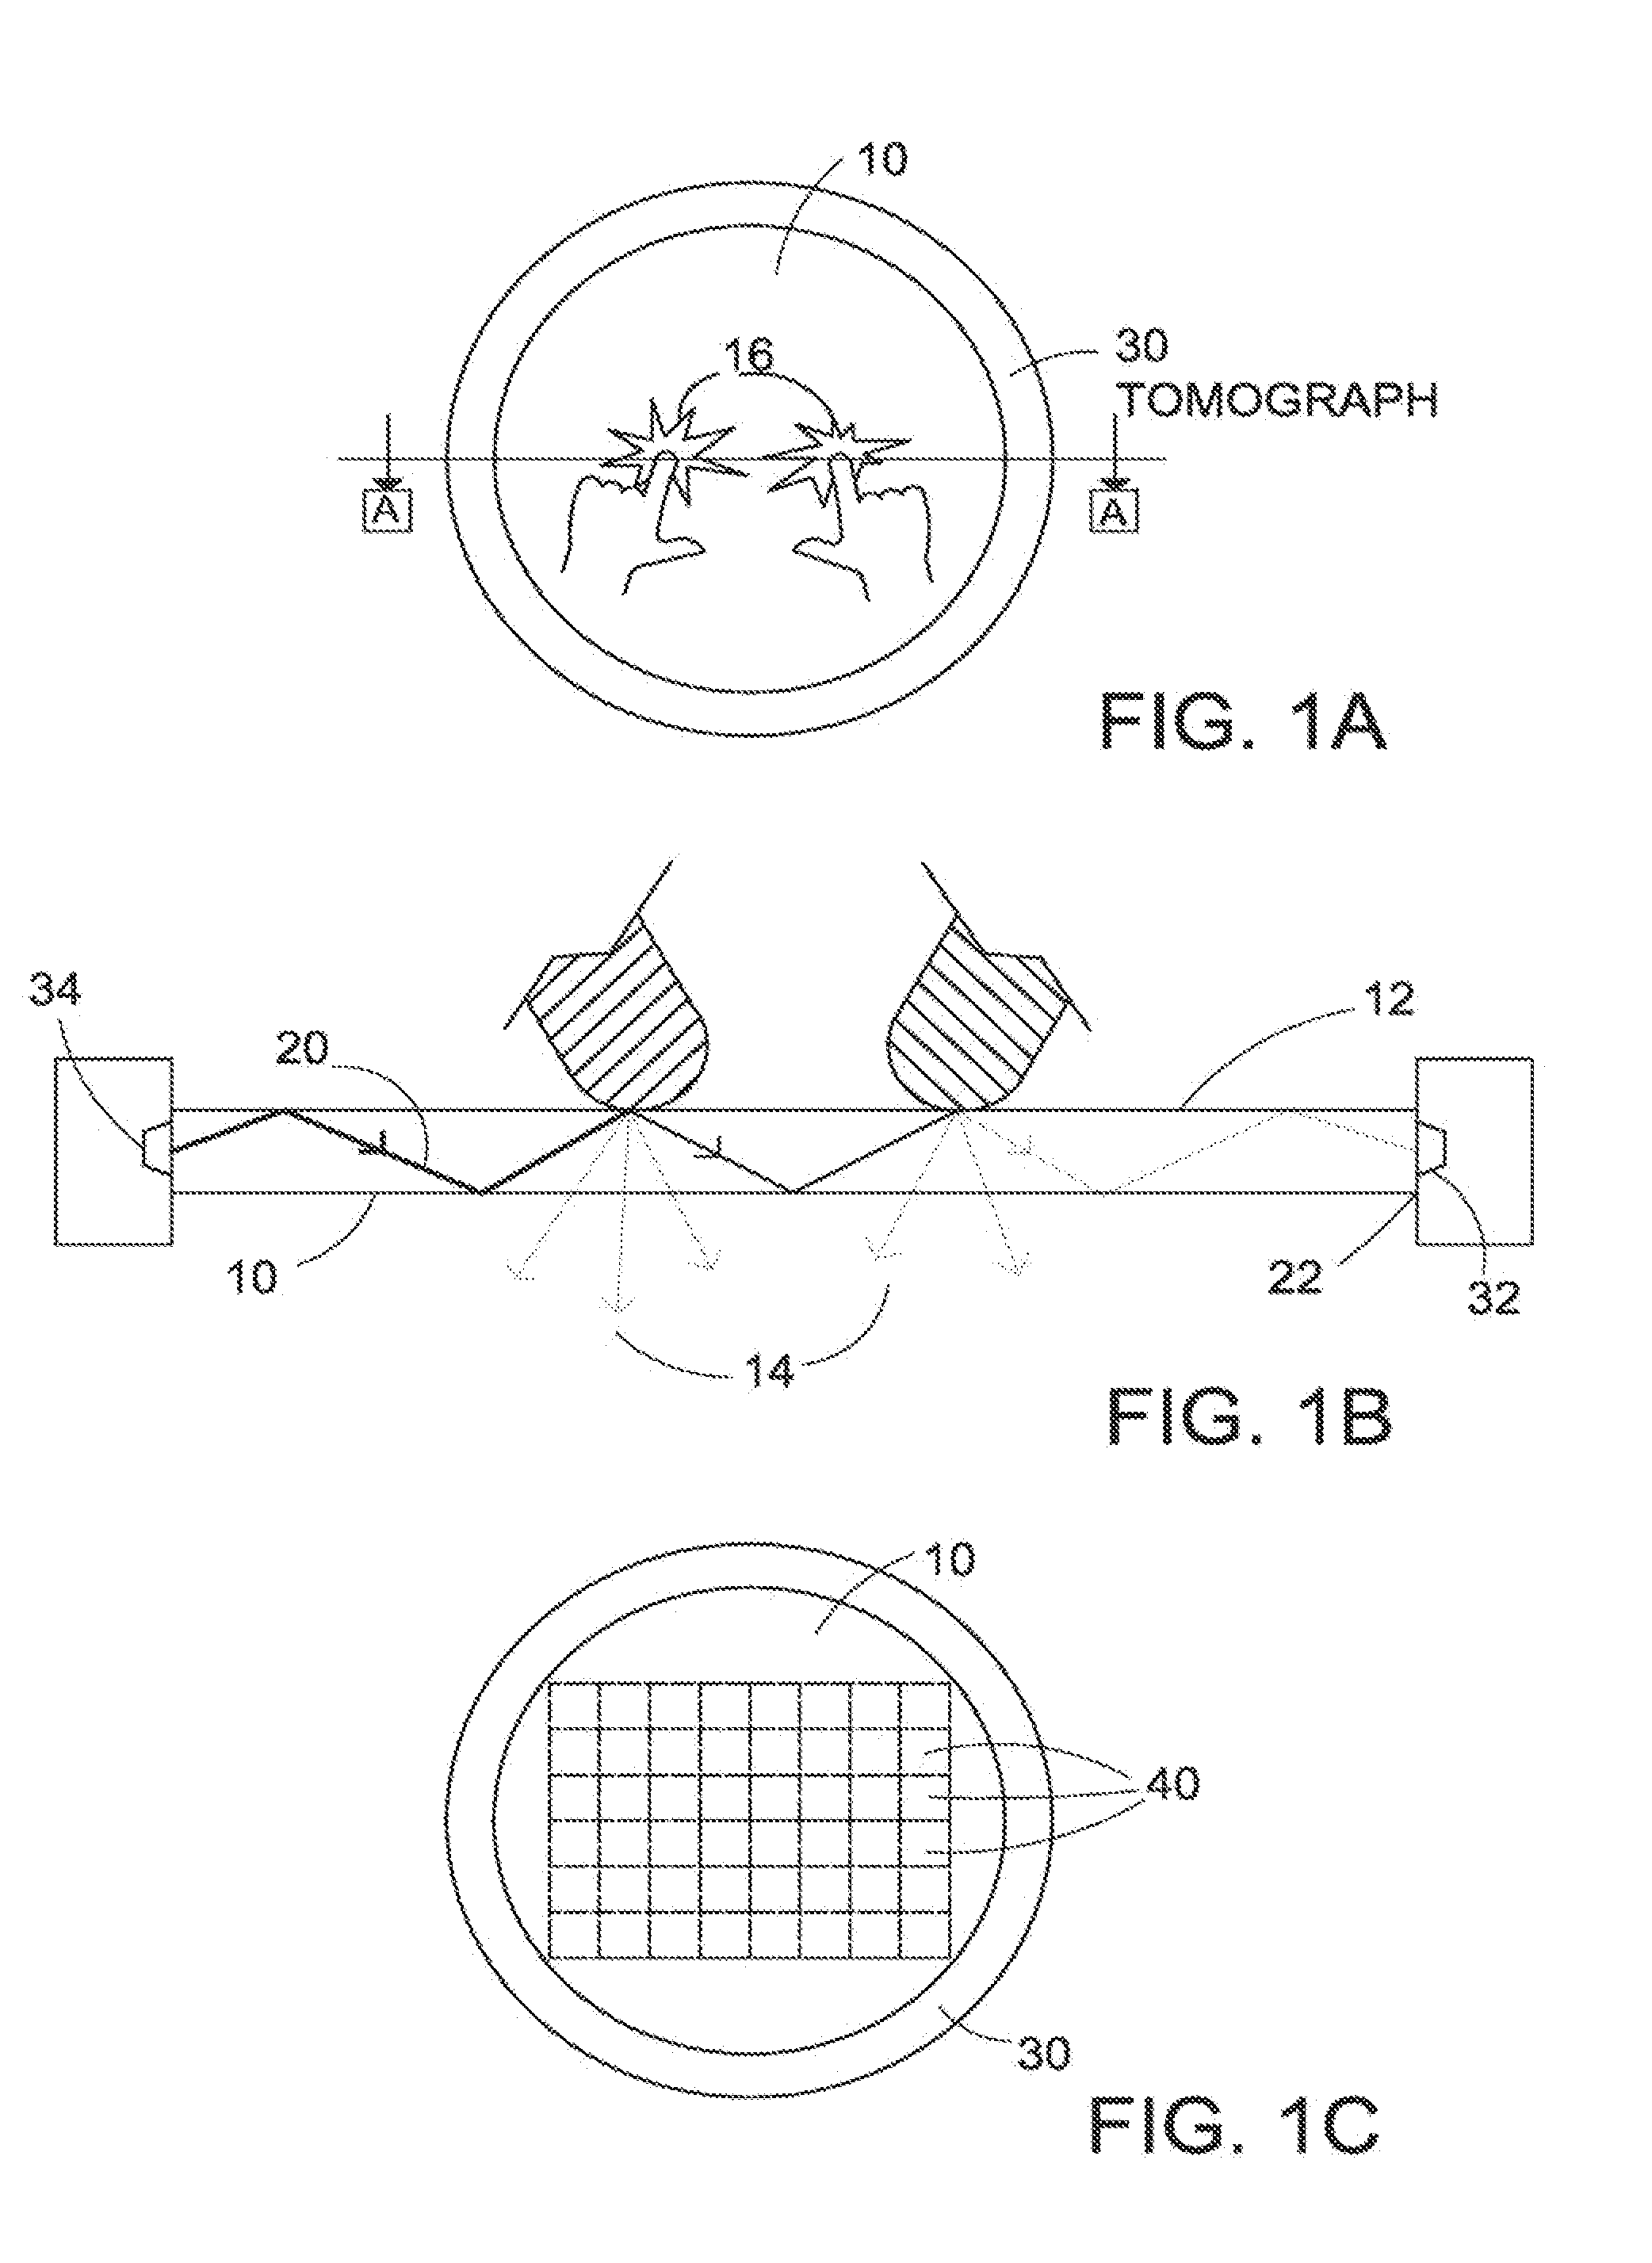 Method and apparatus for tomographic tough imaging and interactive system using same